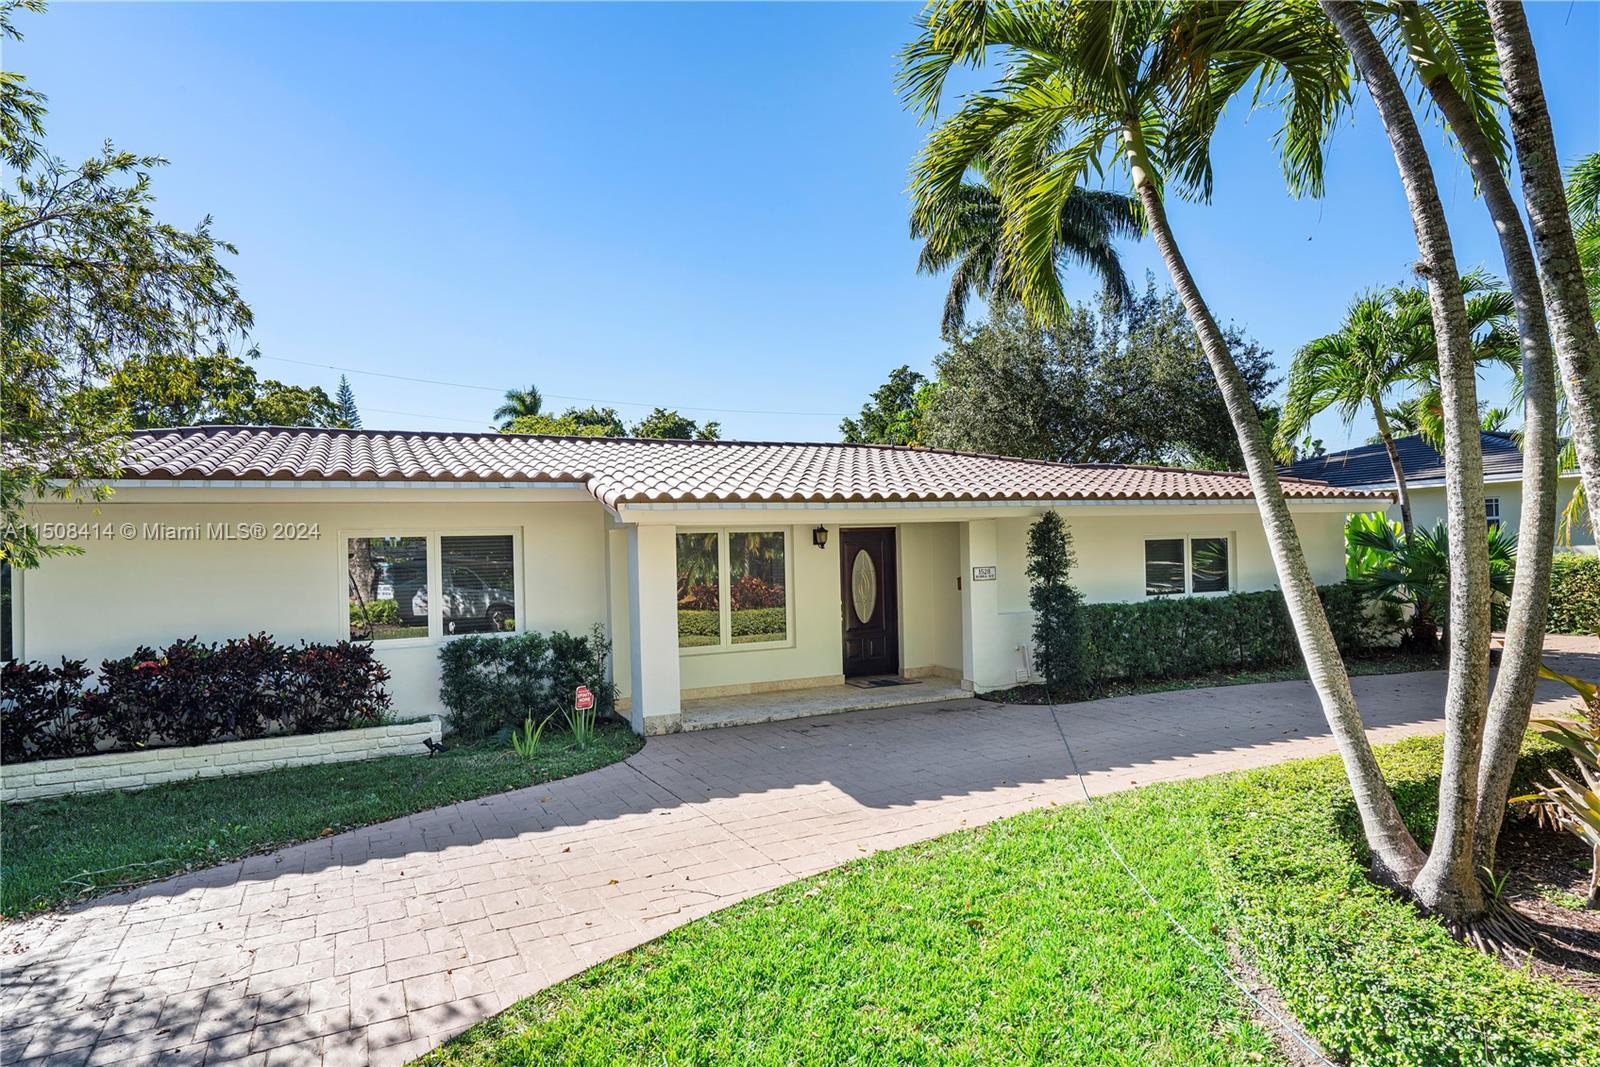 Photo of 1528 Robbia Ave in Coral Gables, FL